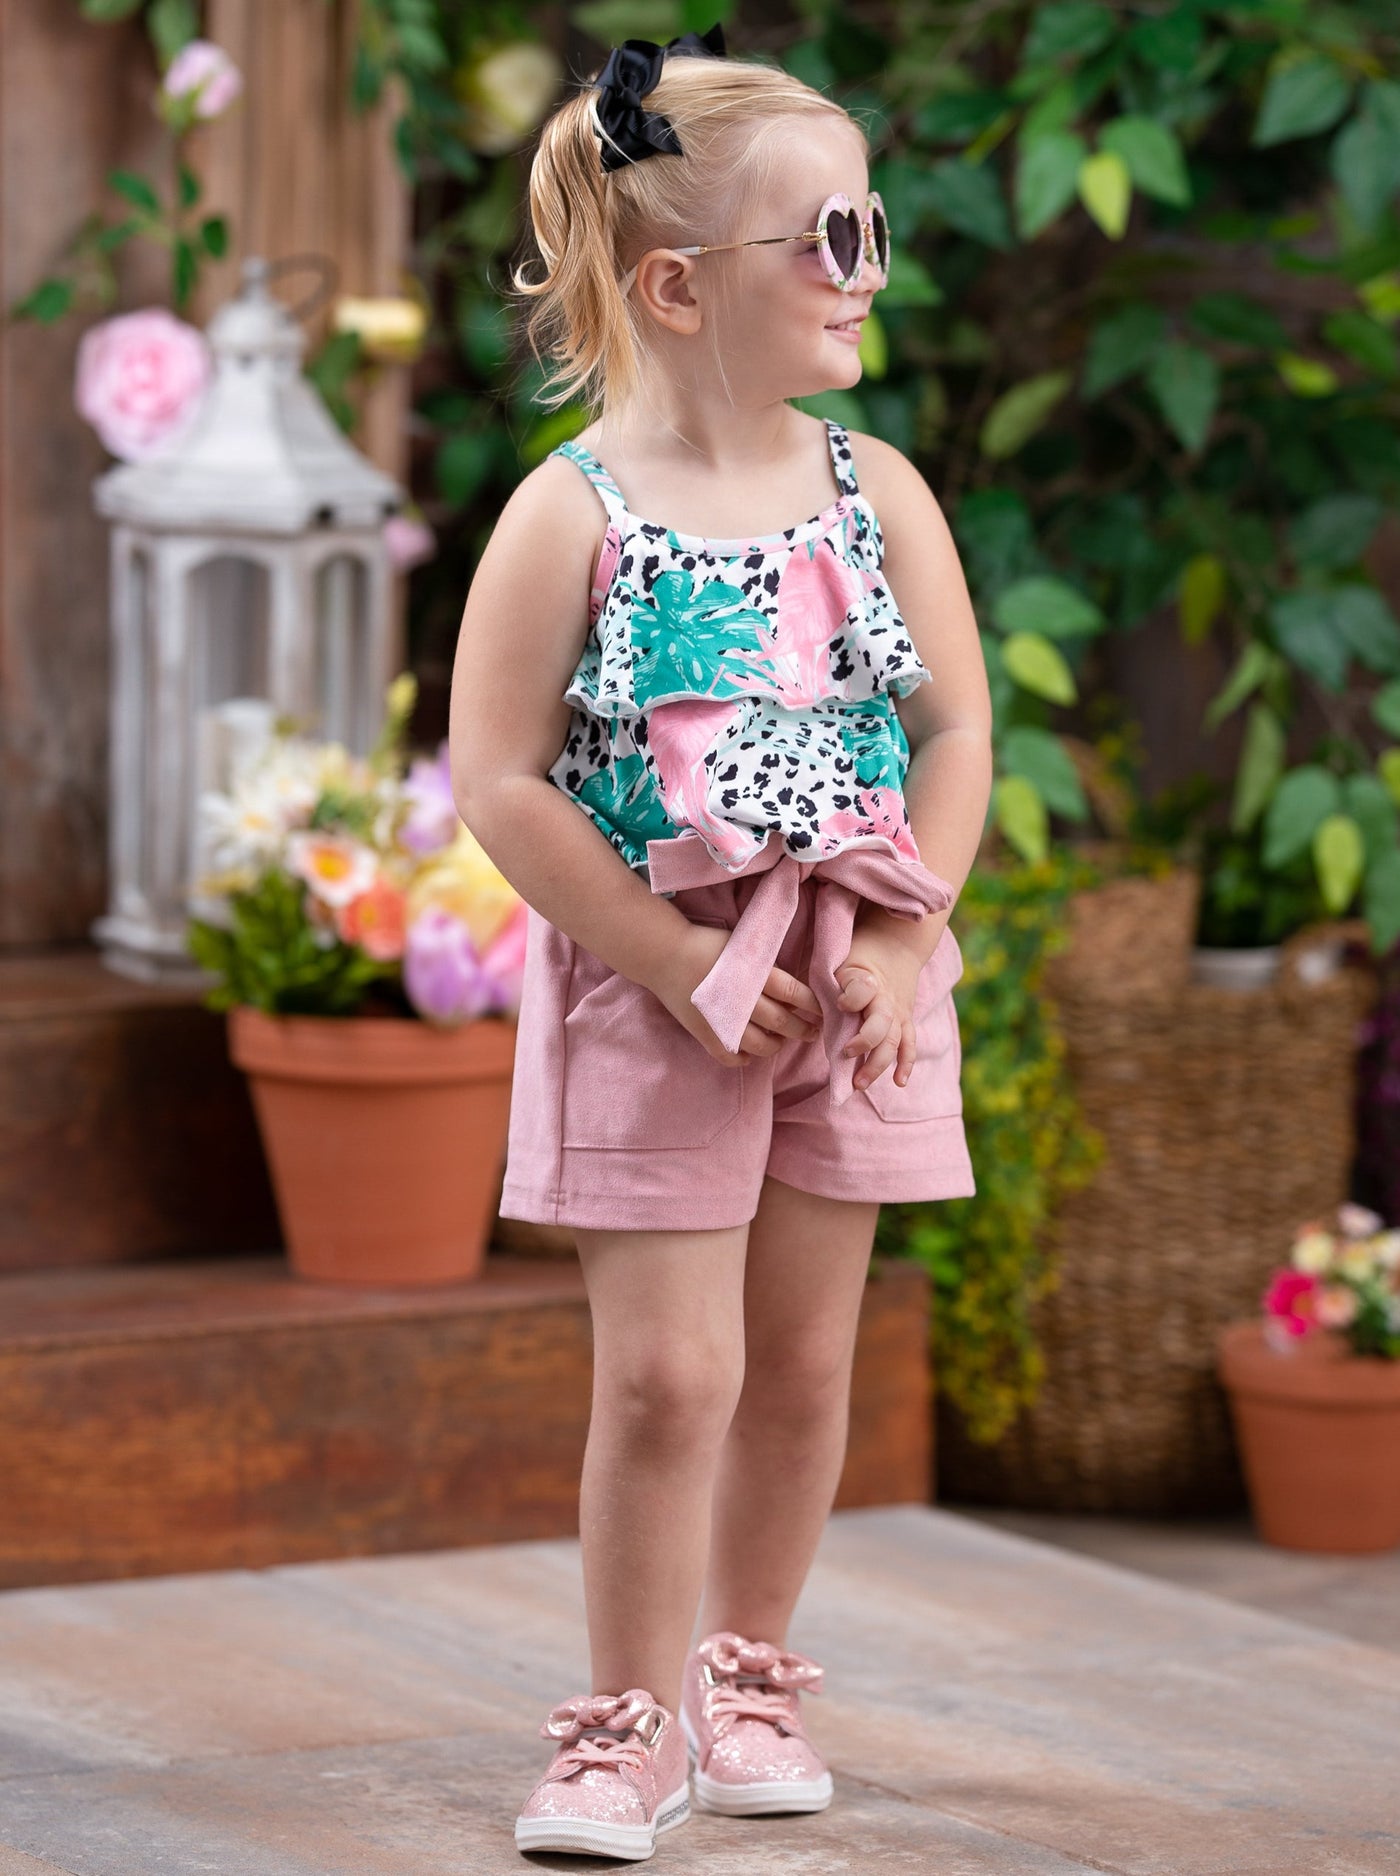 Spring Clothes | Girls Tropic Leopard Ruffle Top & Belted Shorts Set